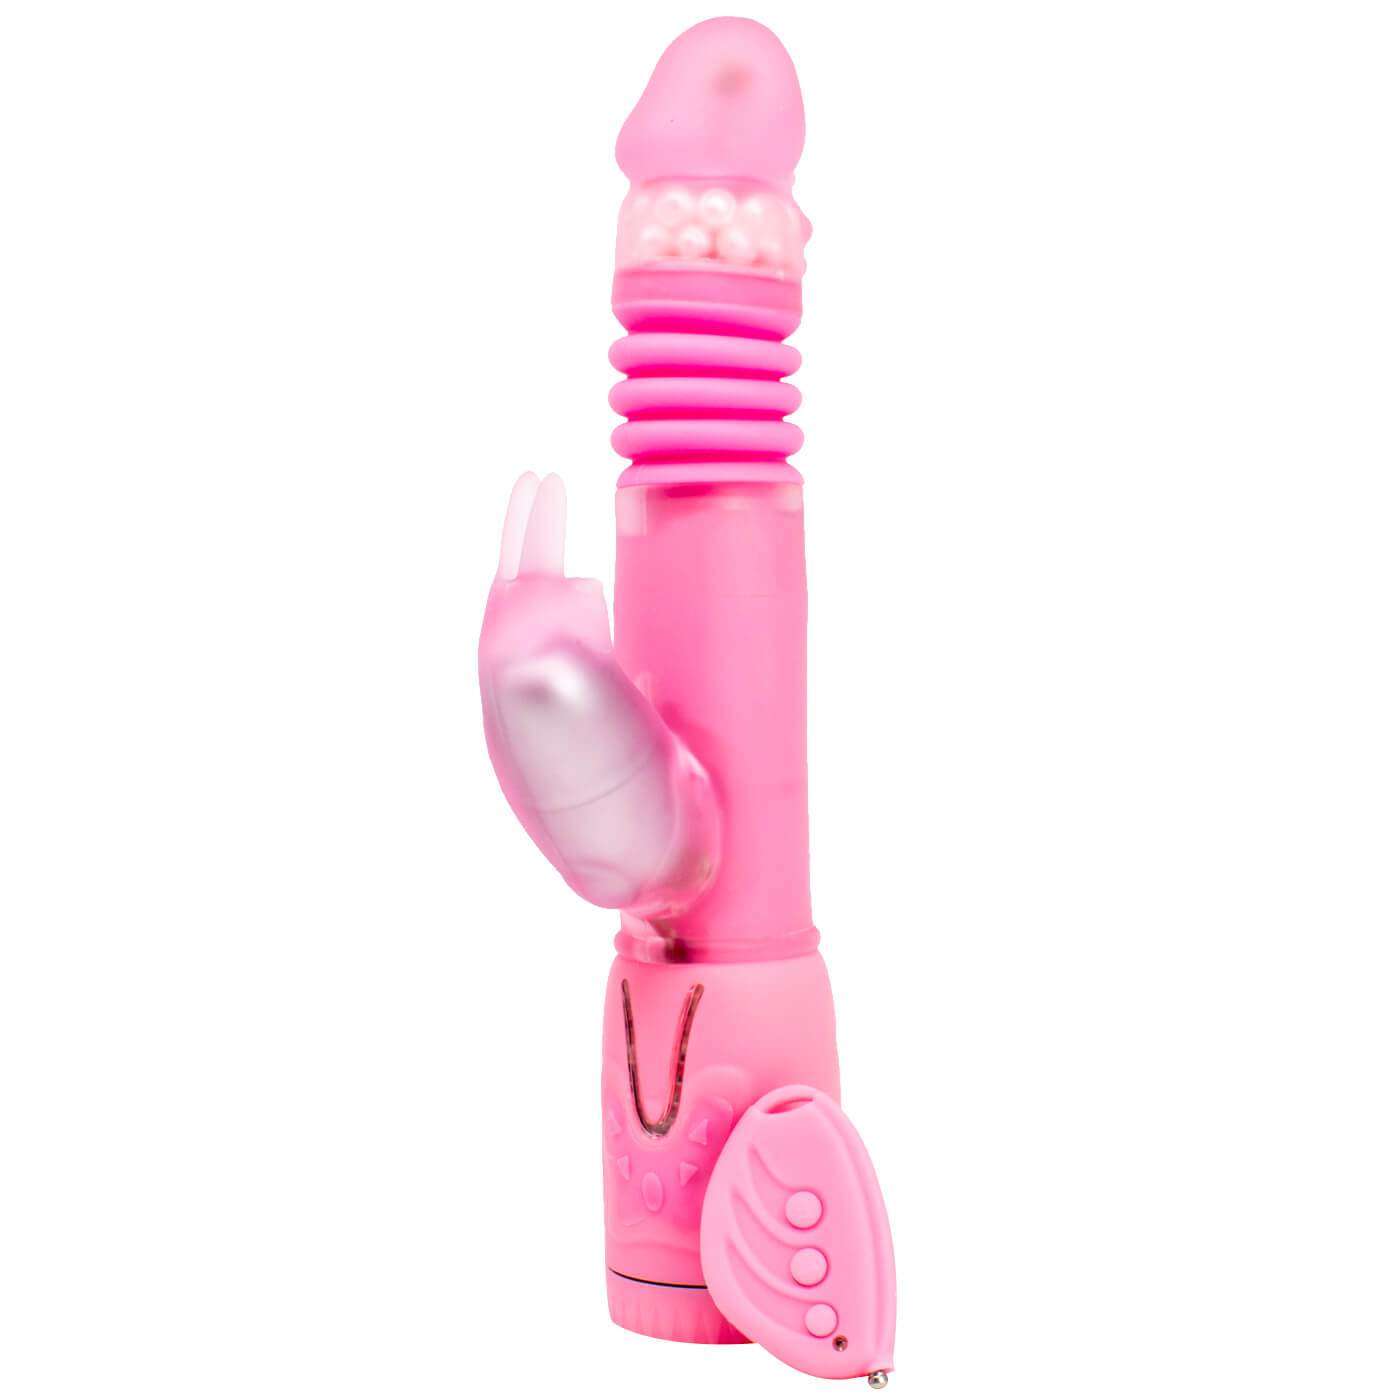 Snake reccomend anal thruster toy